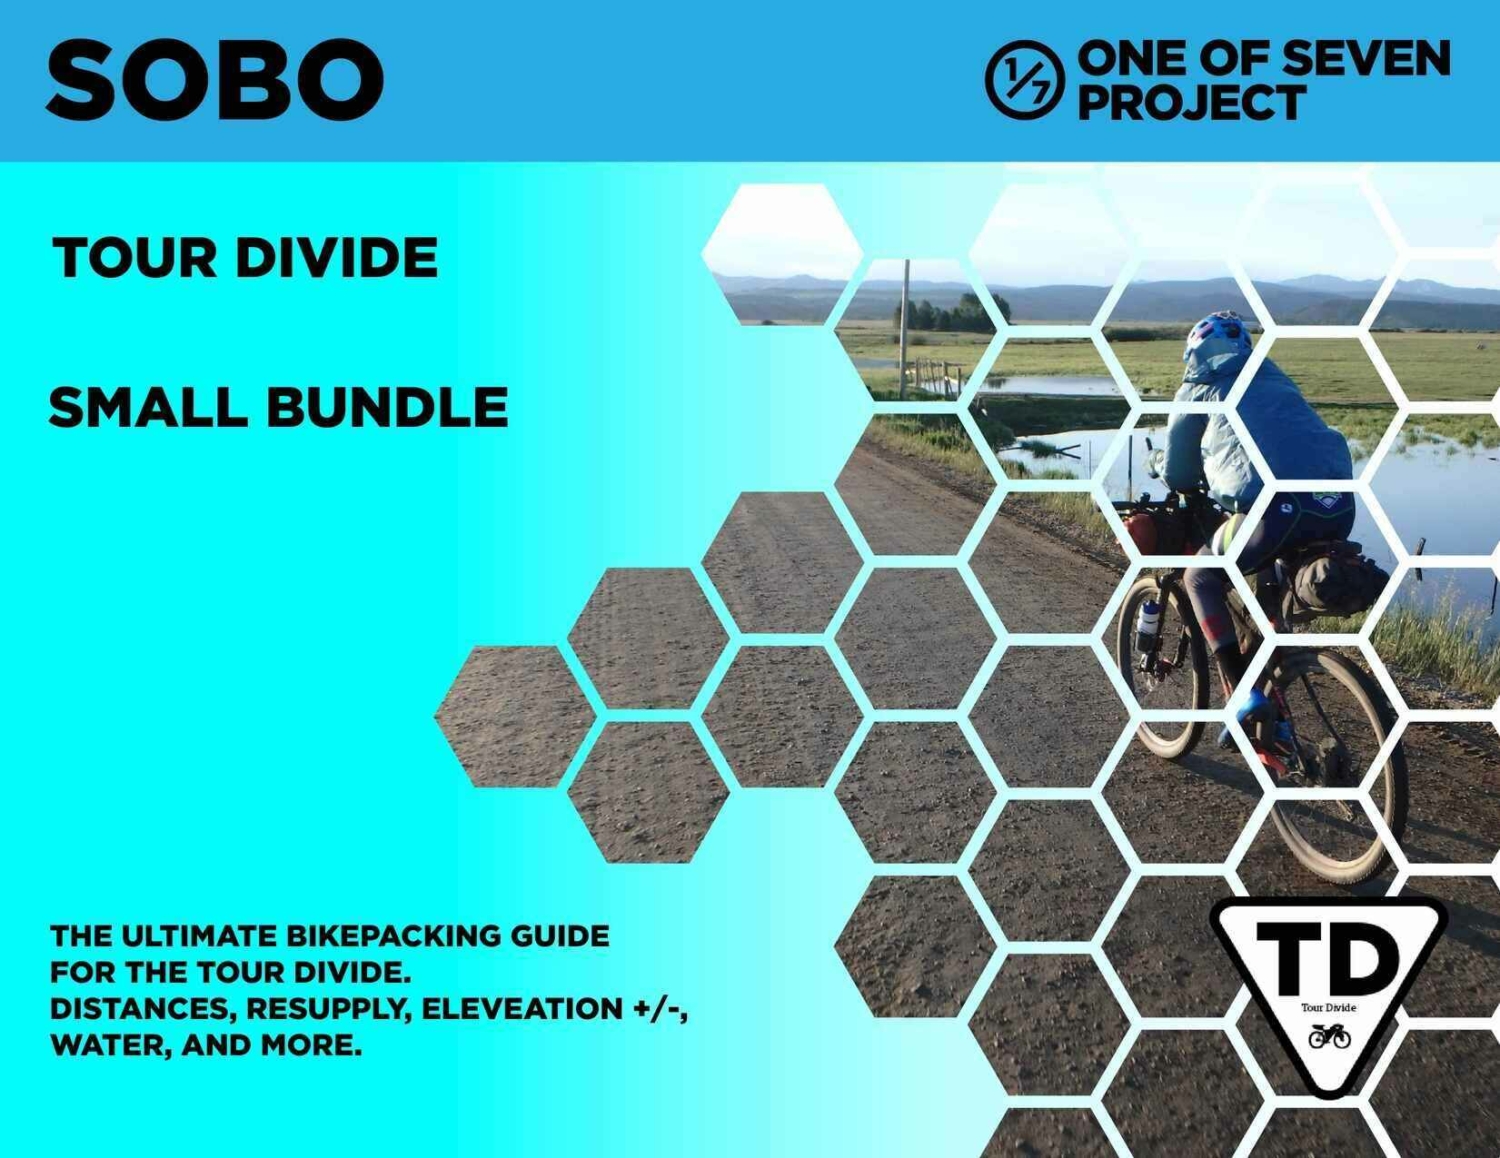 Tour Divide Small Bundle, planning aid, guide, bikepacking